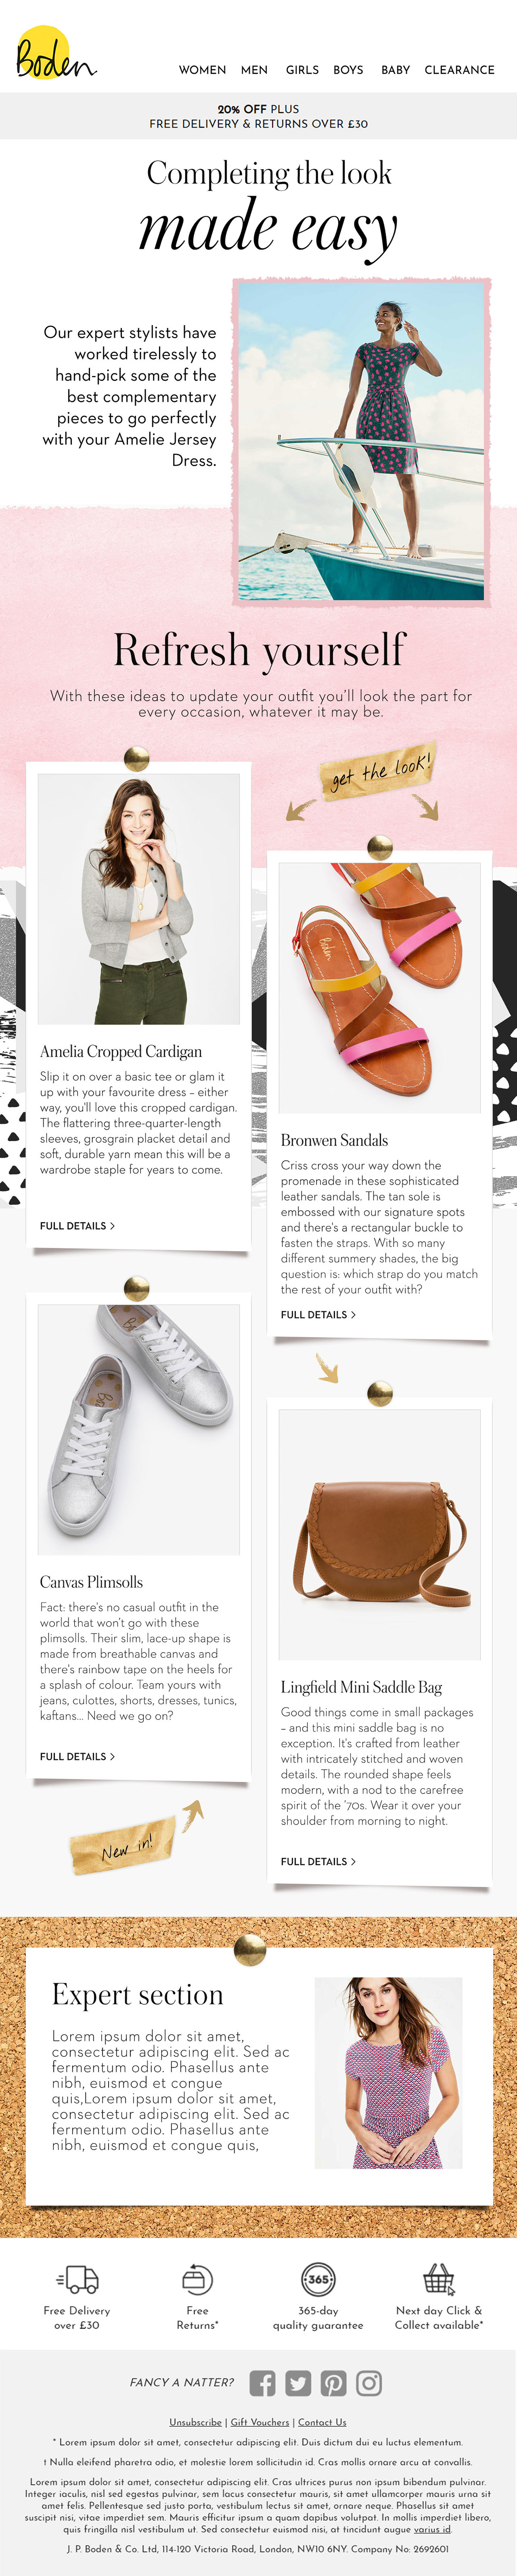 Boden Fashion emails email marketing